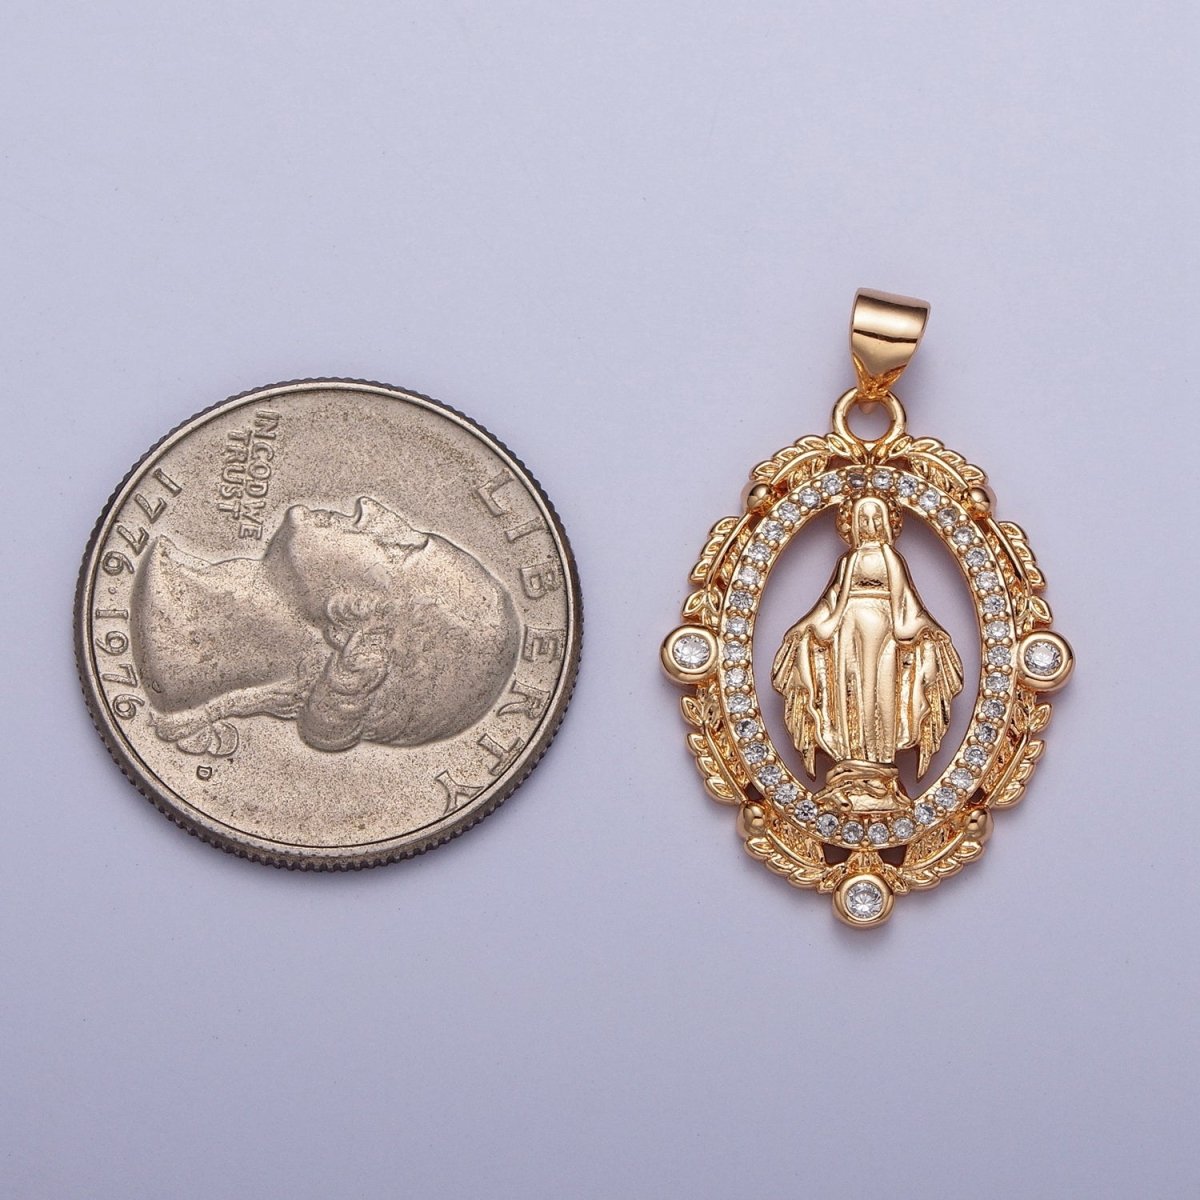 18K Gold Micro Paved CZ Wreath Mother Virgin Mary Pendant For Religious Jewelry Making H-315 - DLUXCA